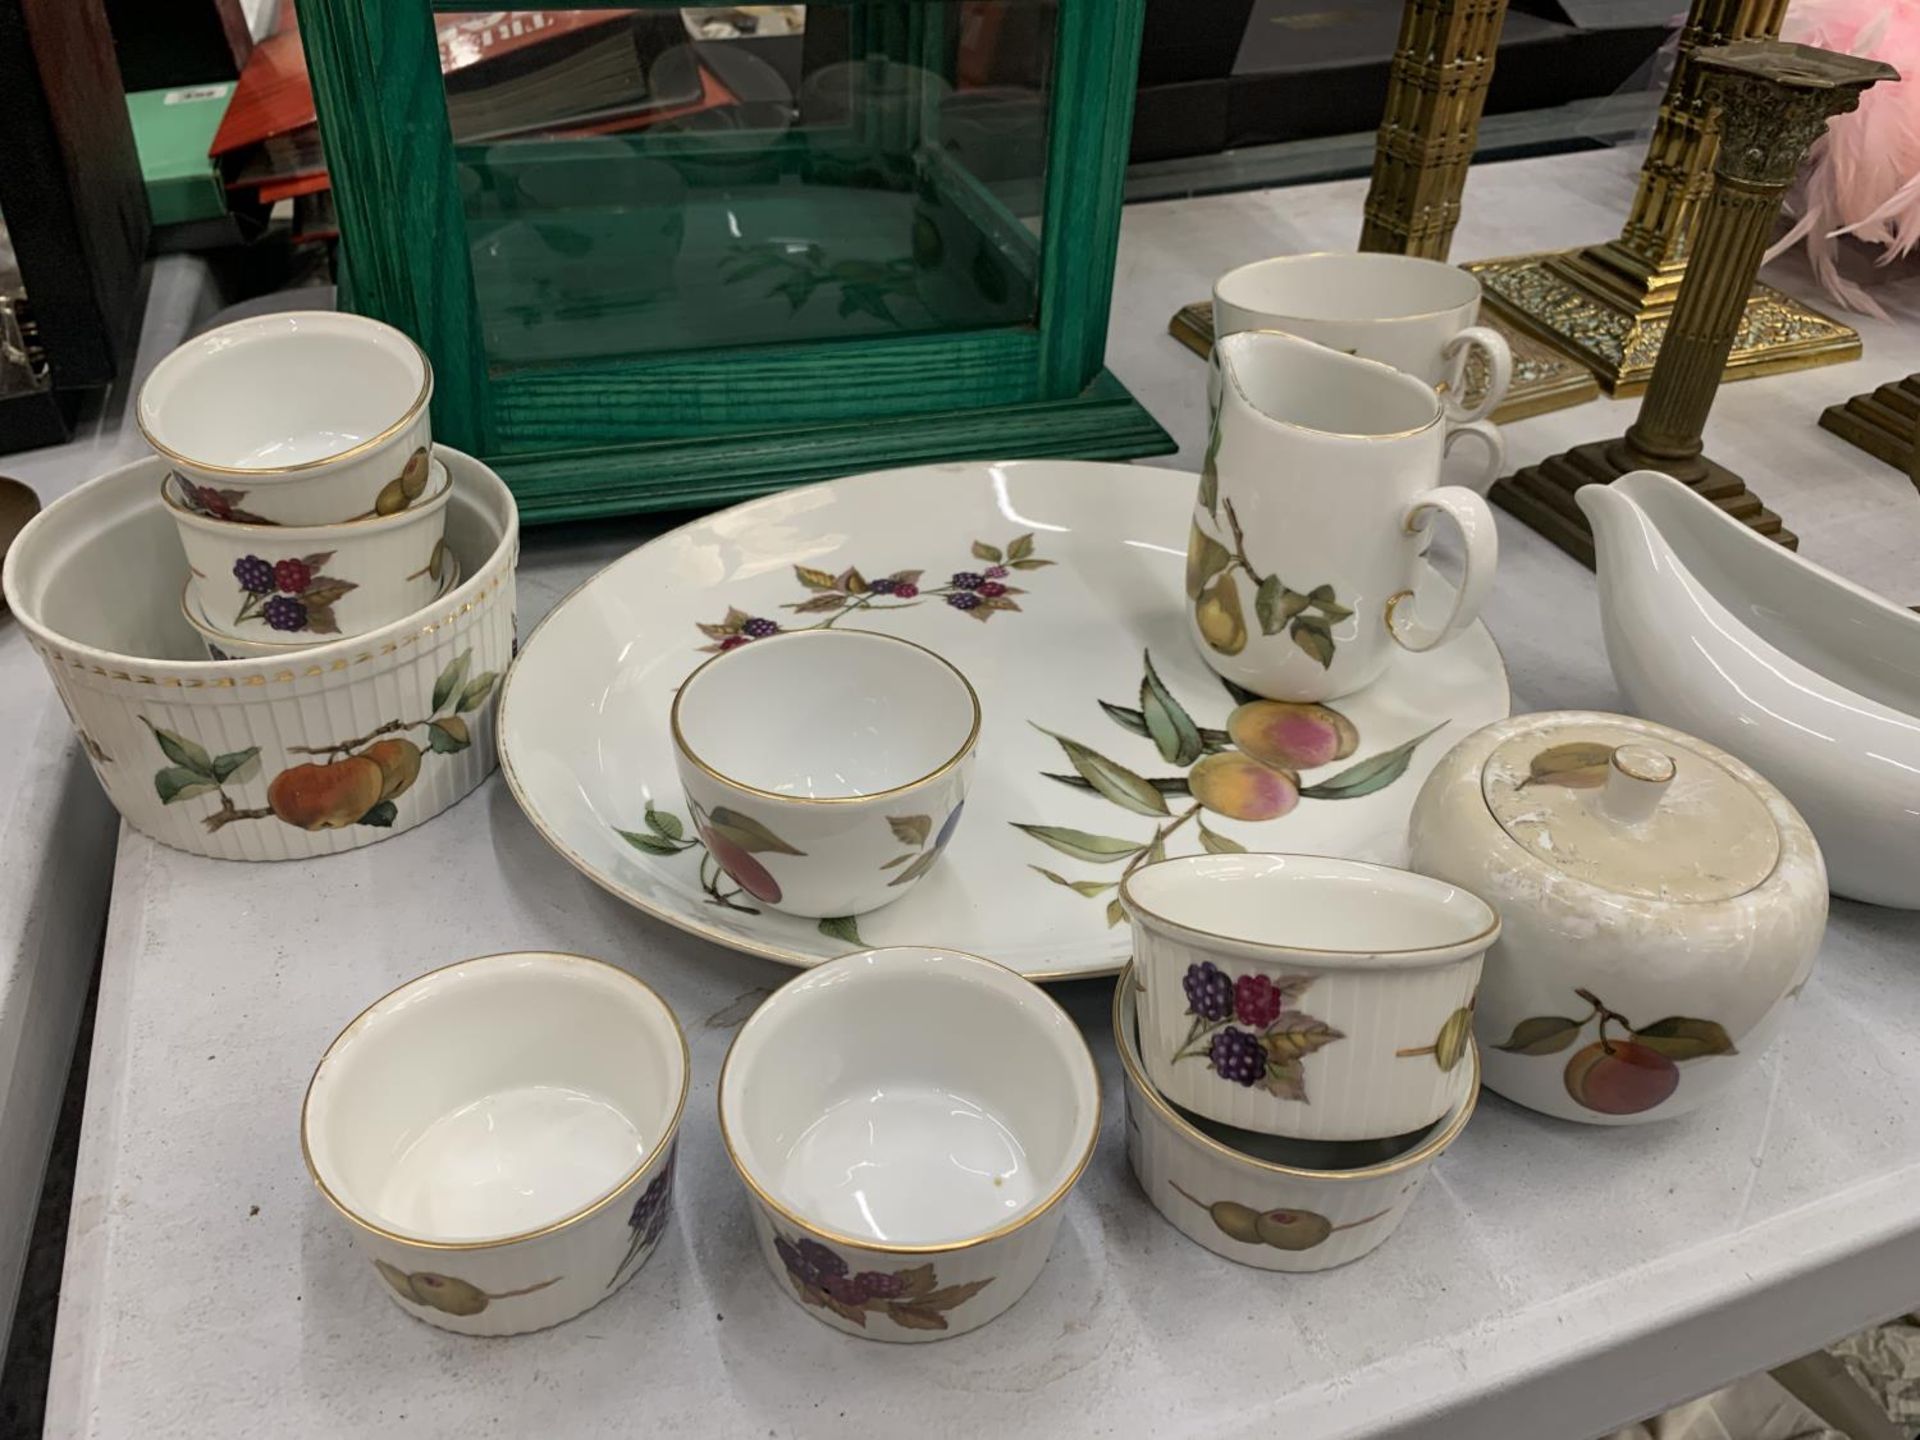 A QUANTITY OF ROYAL WORCESTER 'EVESHAM' TABLE WARE TO INCLUDE A SERVING PLATE, RAMEKINS, CUPS, A - Image 2 of 5